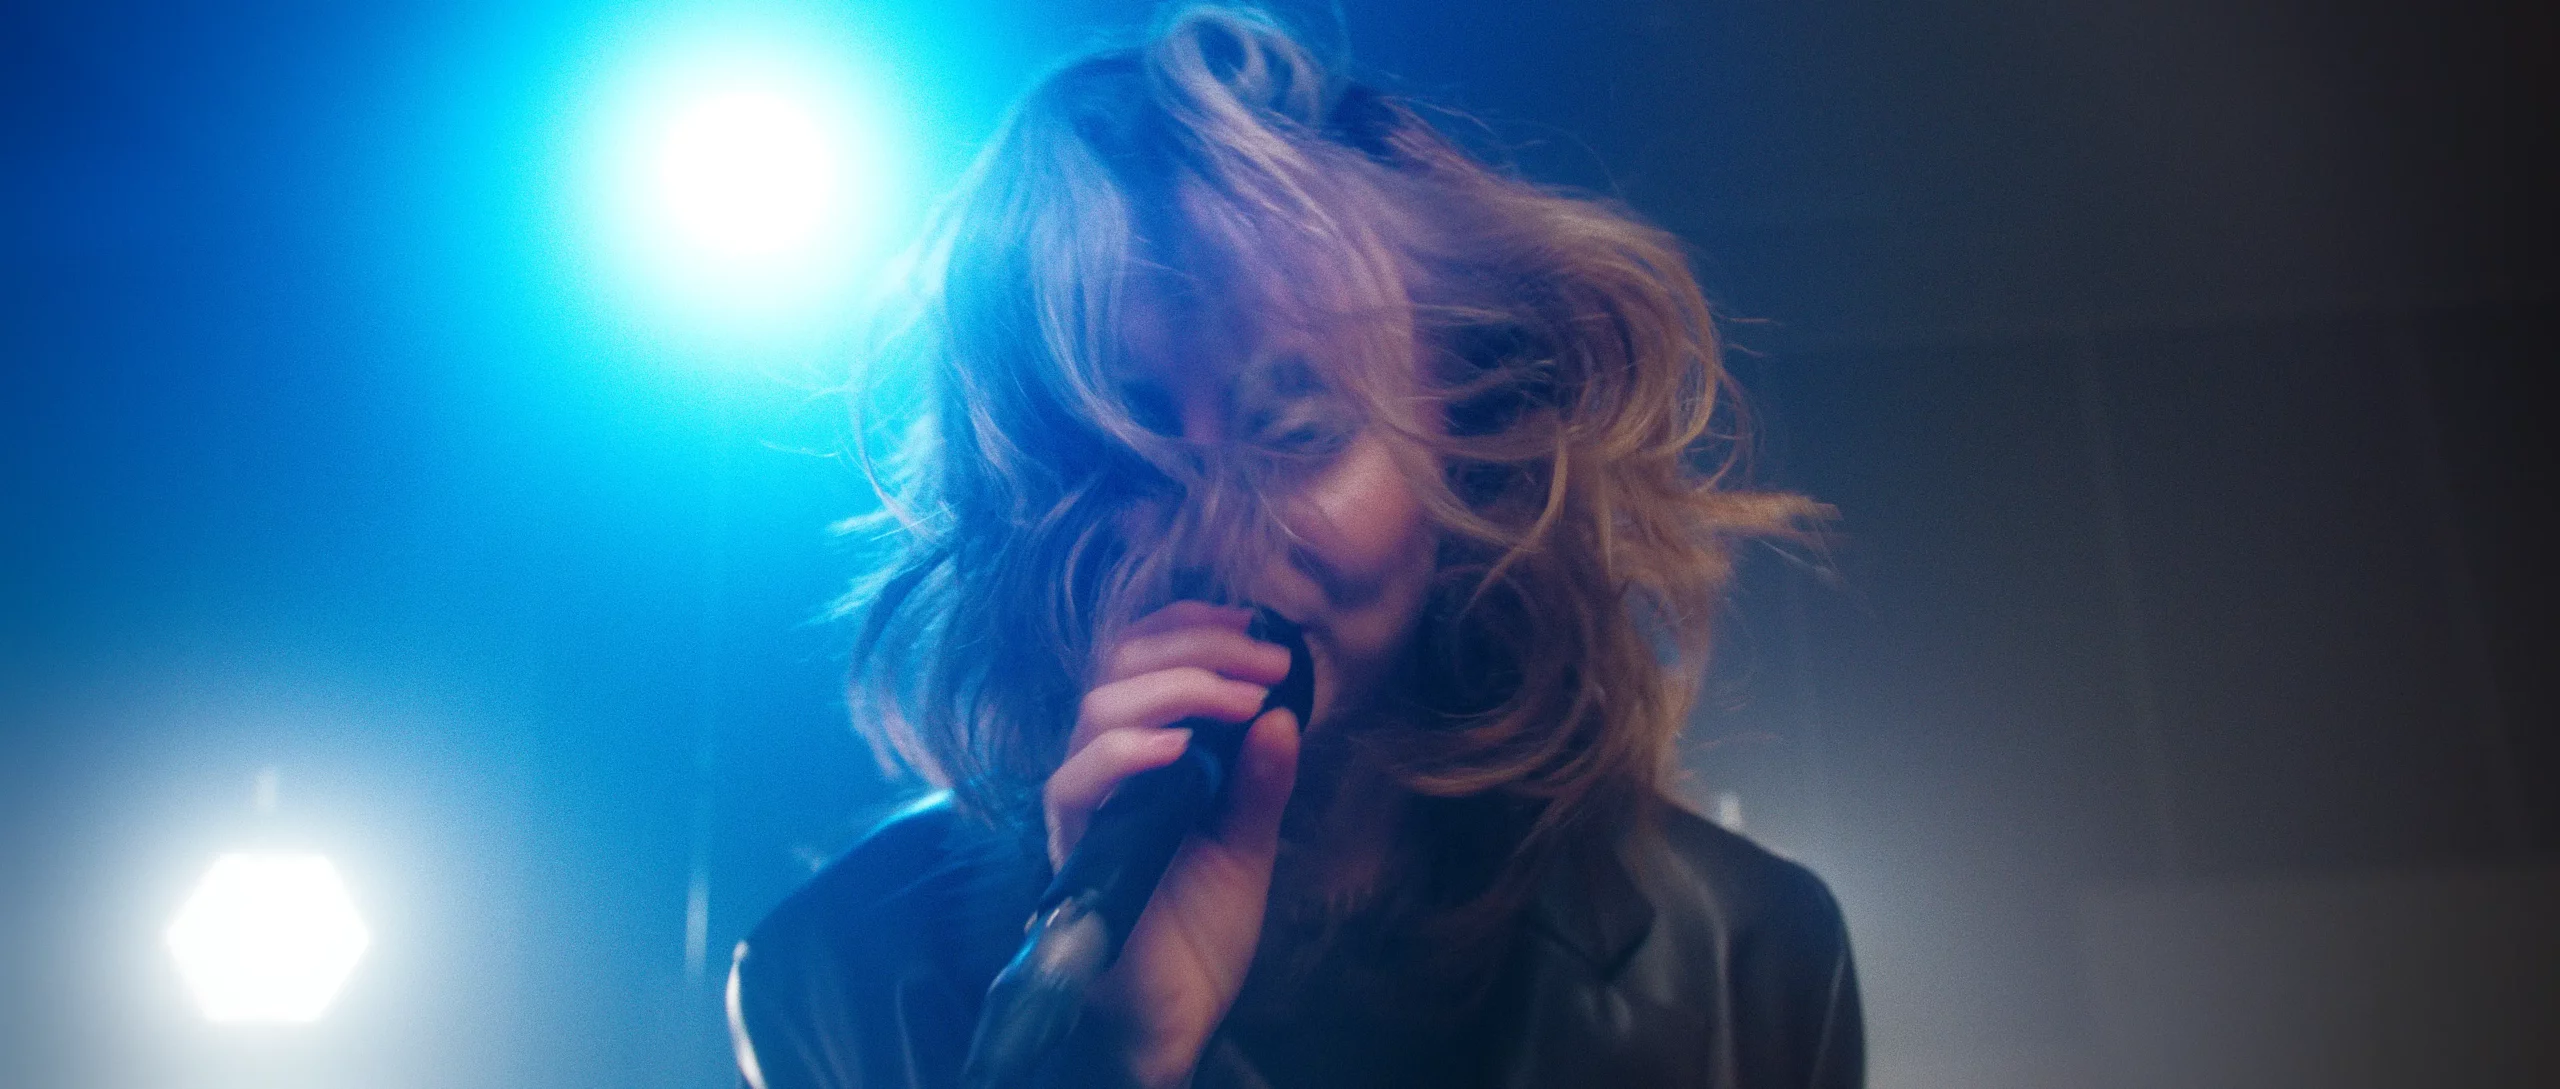 Singer with energetic hair, singing into microphone.